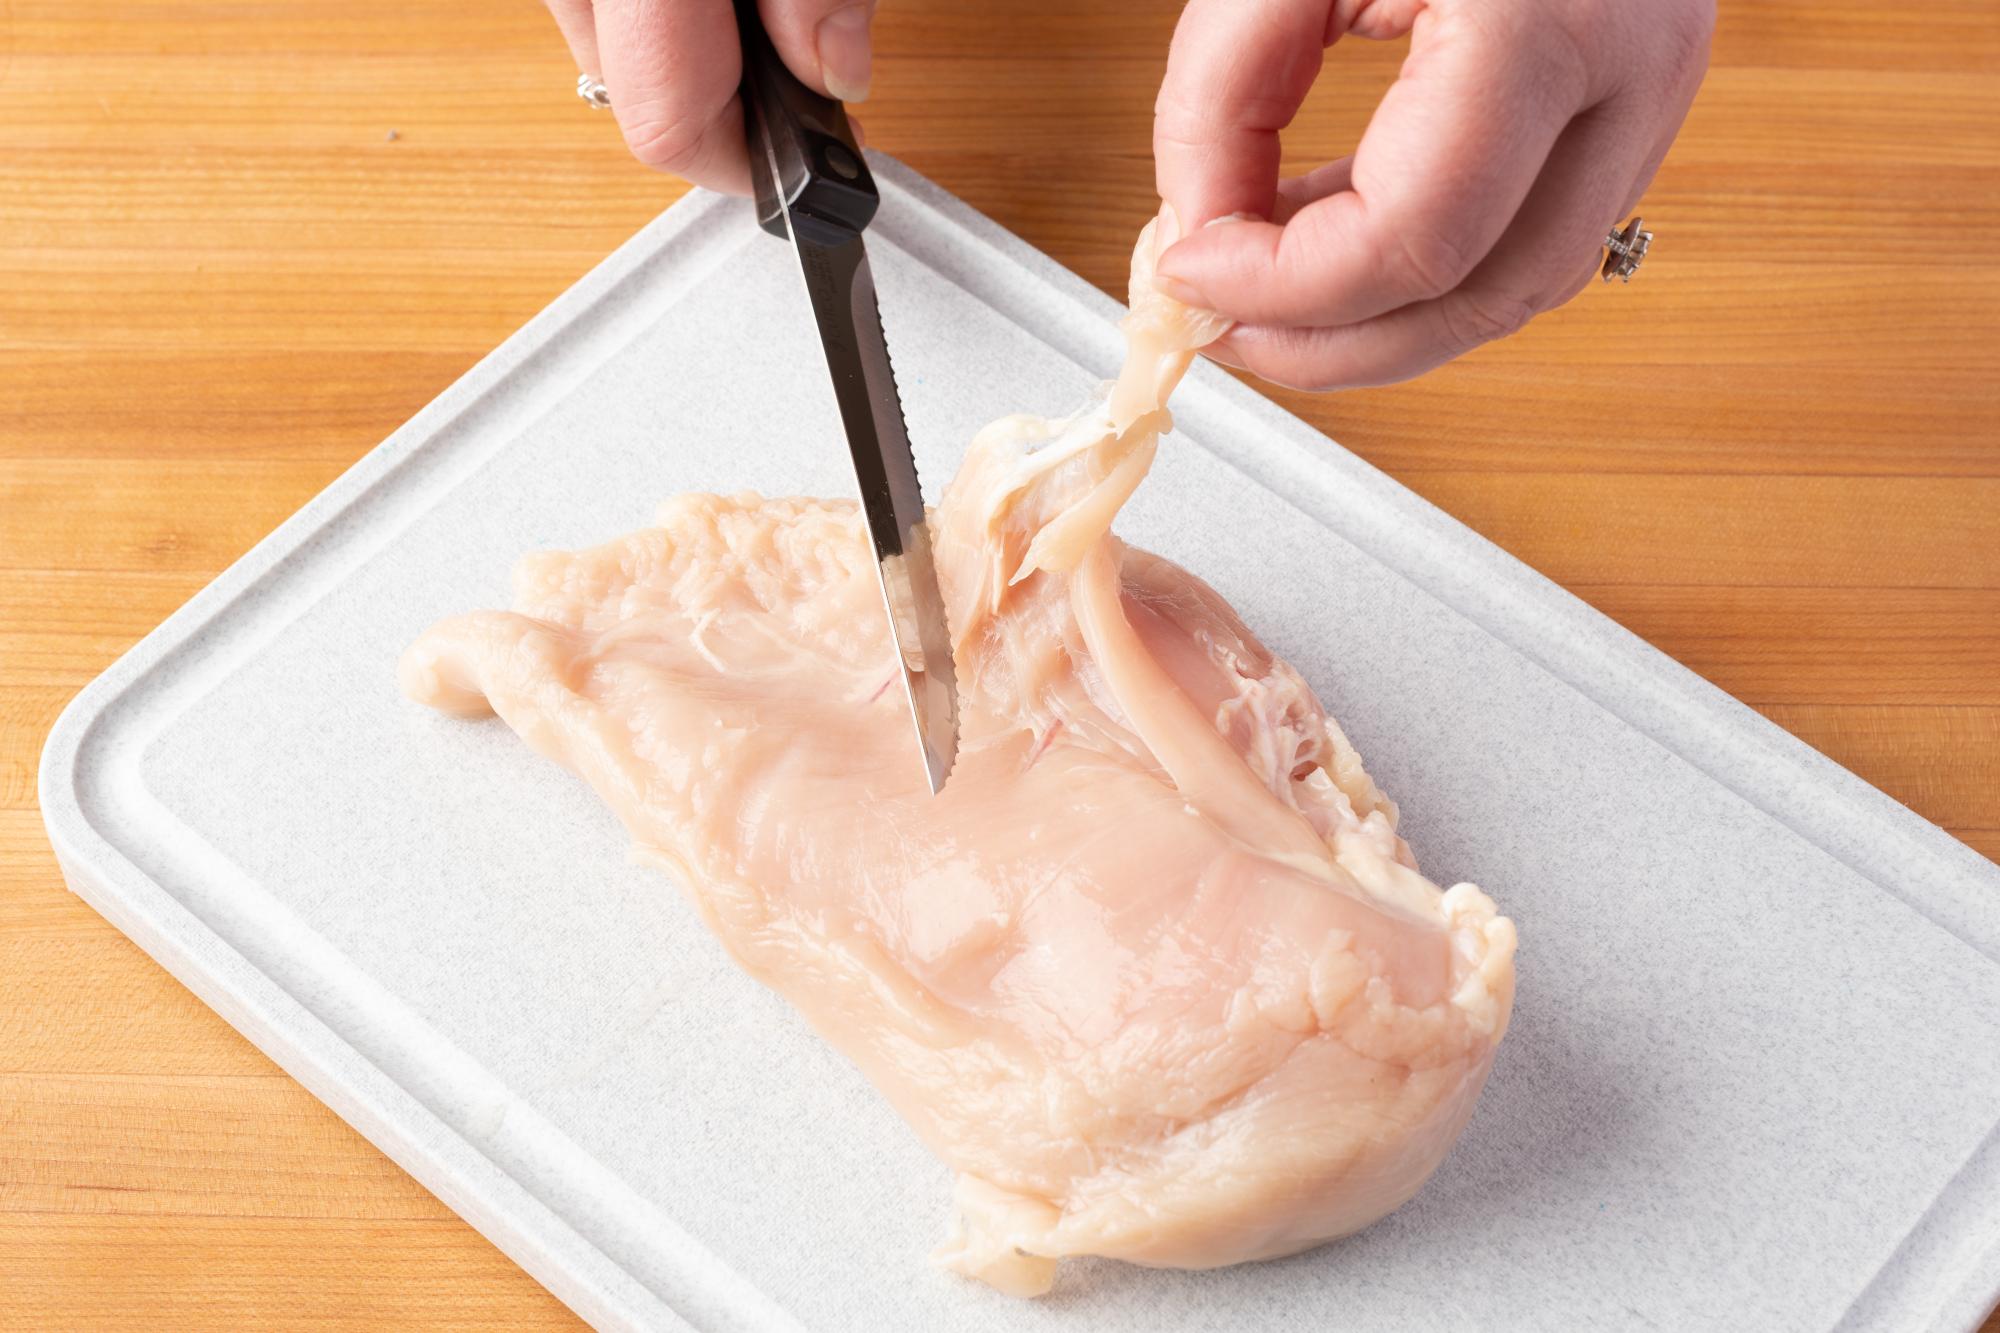 Trim excess fat off the chicken with a Trimmer.